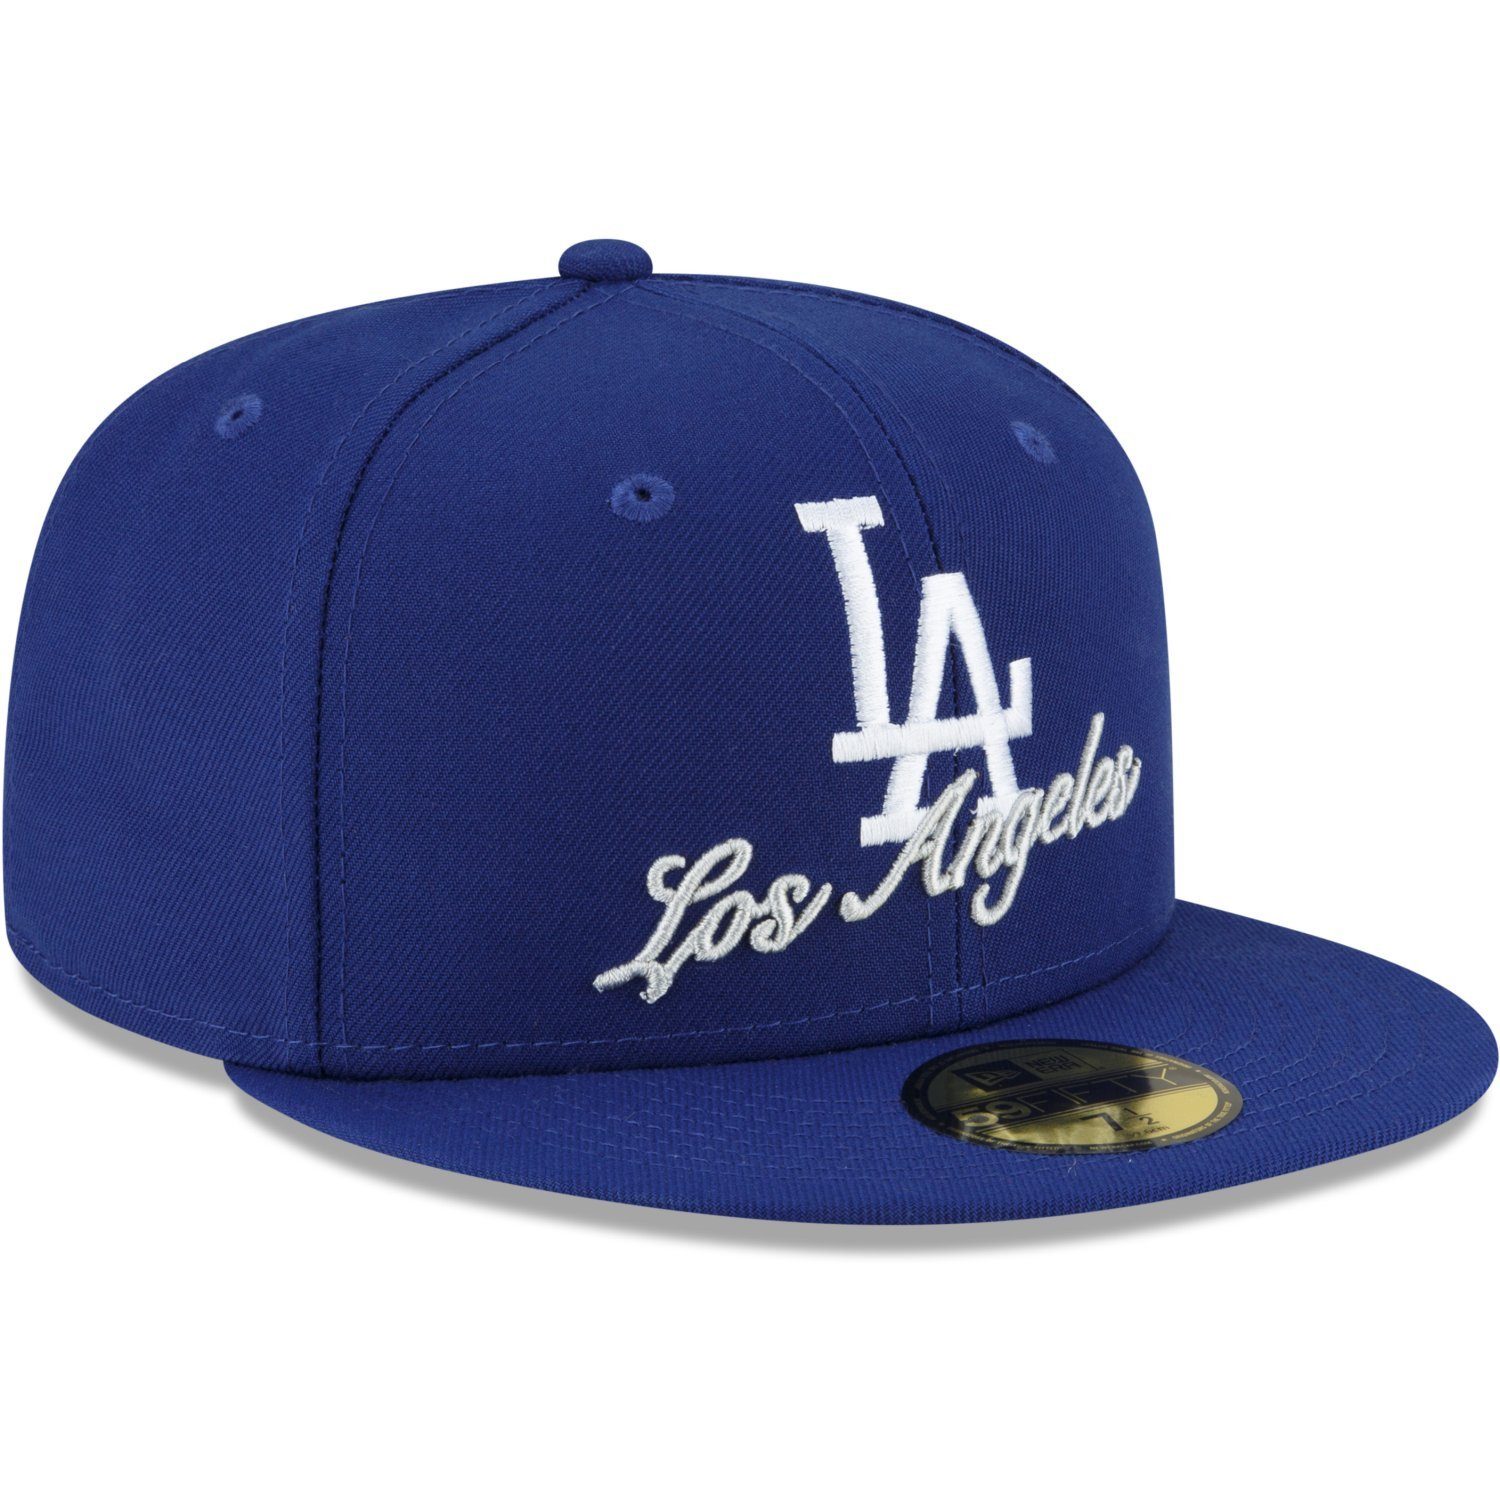 Cap 59Fifty Angeles New Los LOGO DUAL Dodgers Fitted Era